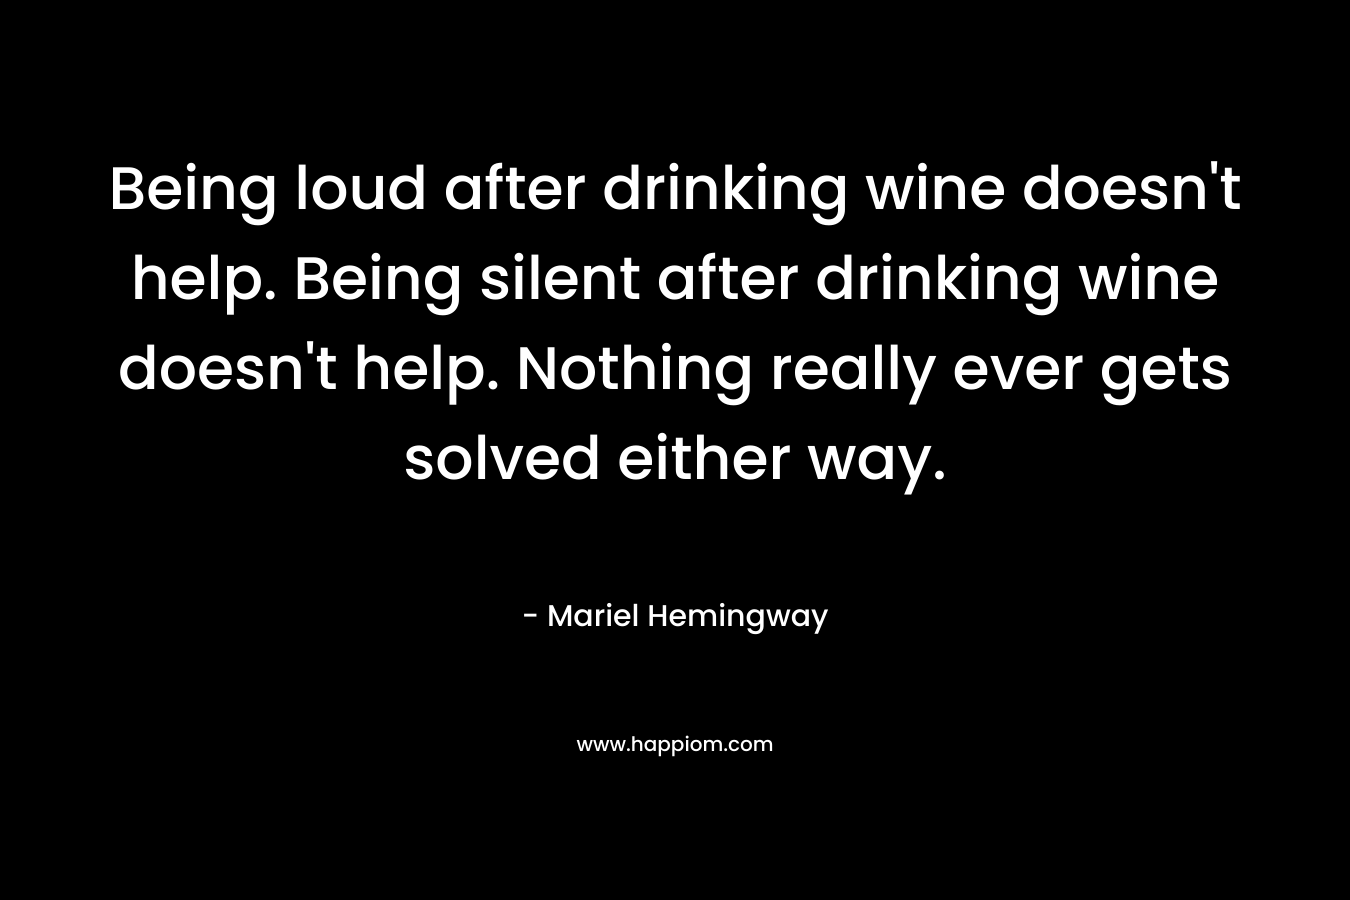 Being loud after drinking wine doesn't help. Being silent after drinking wine doesn't help. Nothing really ever gets solved either way.